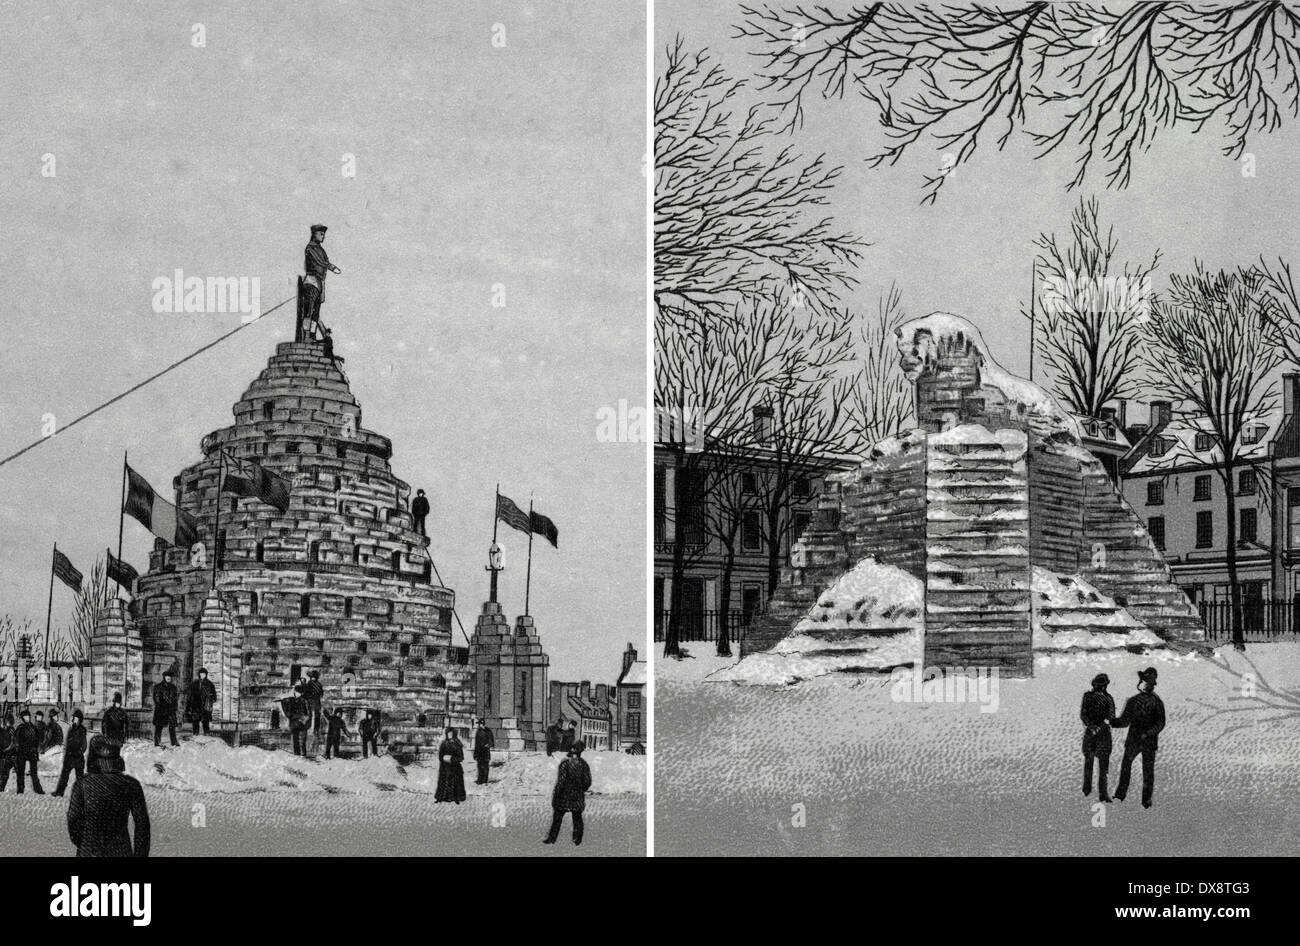 Circa 1885 views from the 1885 Montreal Winter Carnival in Montreal, Quebec, Canada: Ice Condora (left) and Ice Lion (right). Printed in an antique souvenir album using the Glaser/Frey lithographic process. Stock Photo